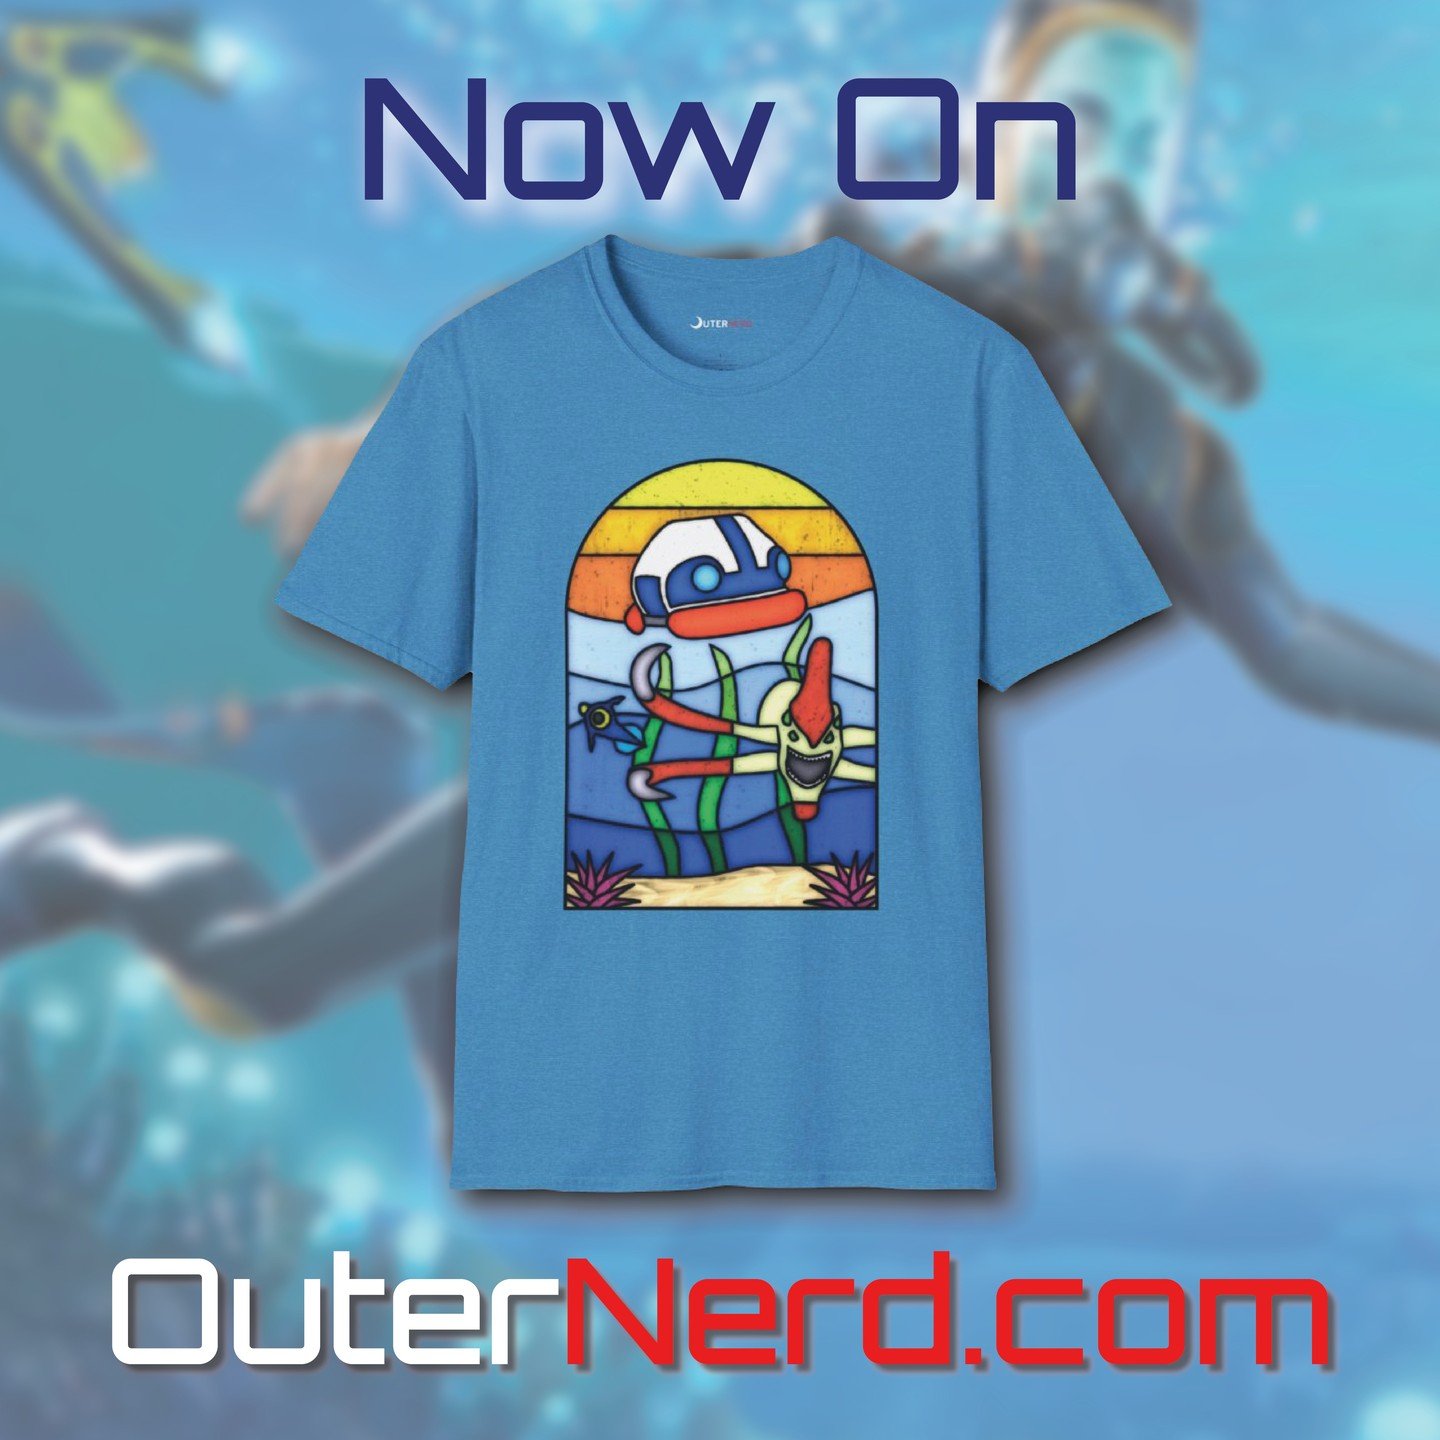 The second shirt in the Stained Survival series! A design inspired by Subnautica :D I also have keychains on the way and transparent stickers on ON.com, perfect for having your own Subnautica Stained glass window at home!
.
.
.
#survivalgame #videoga